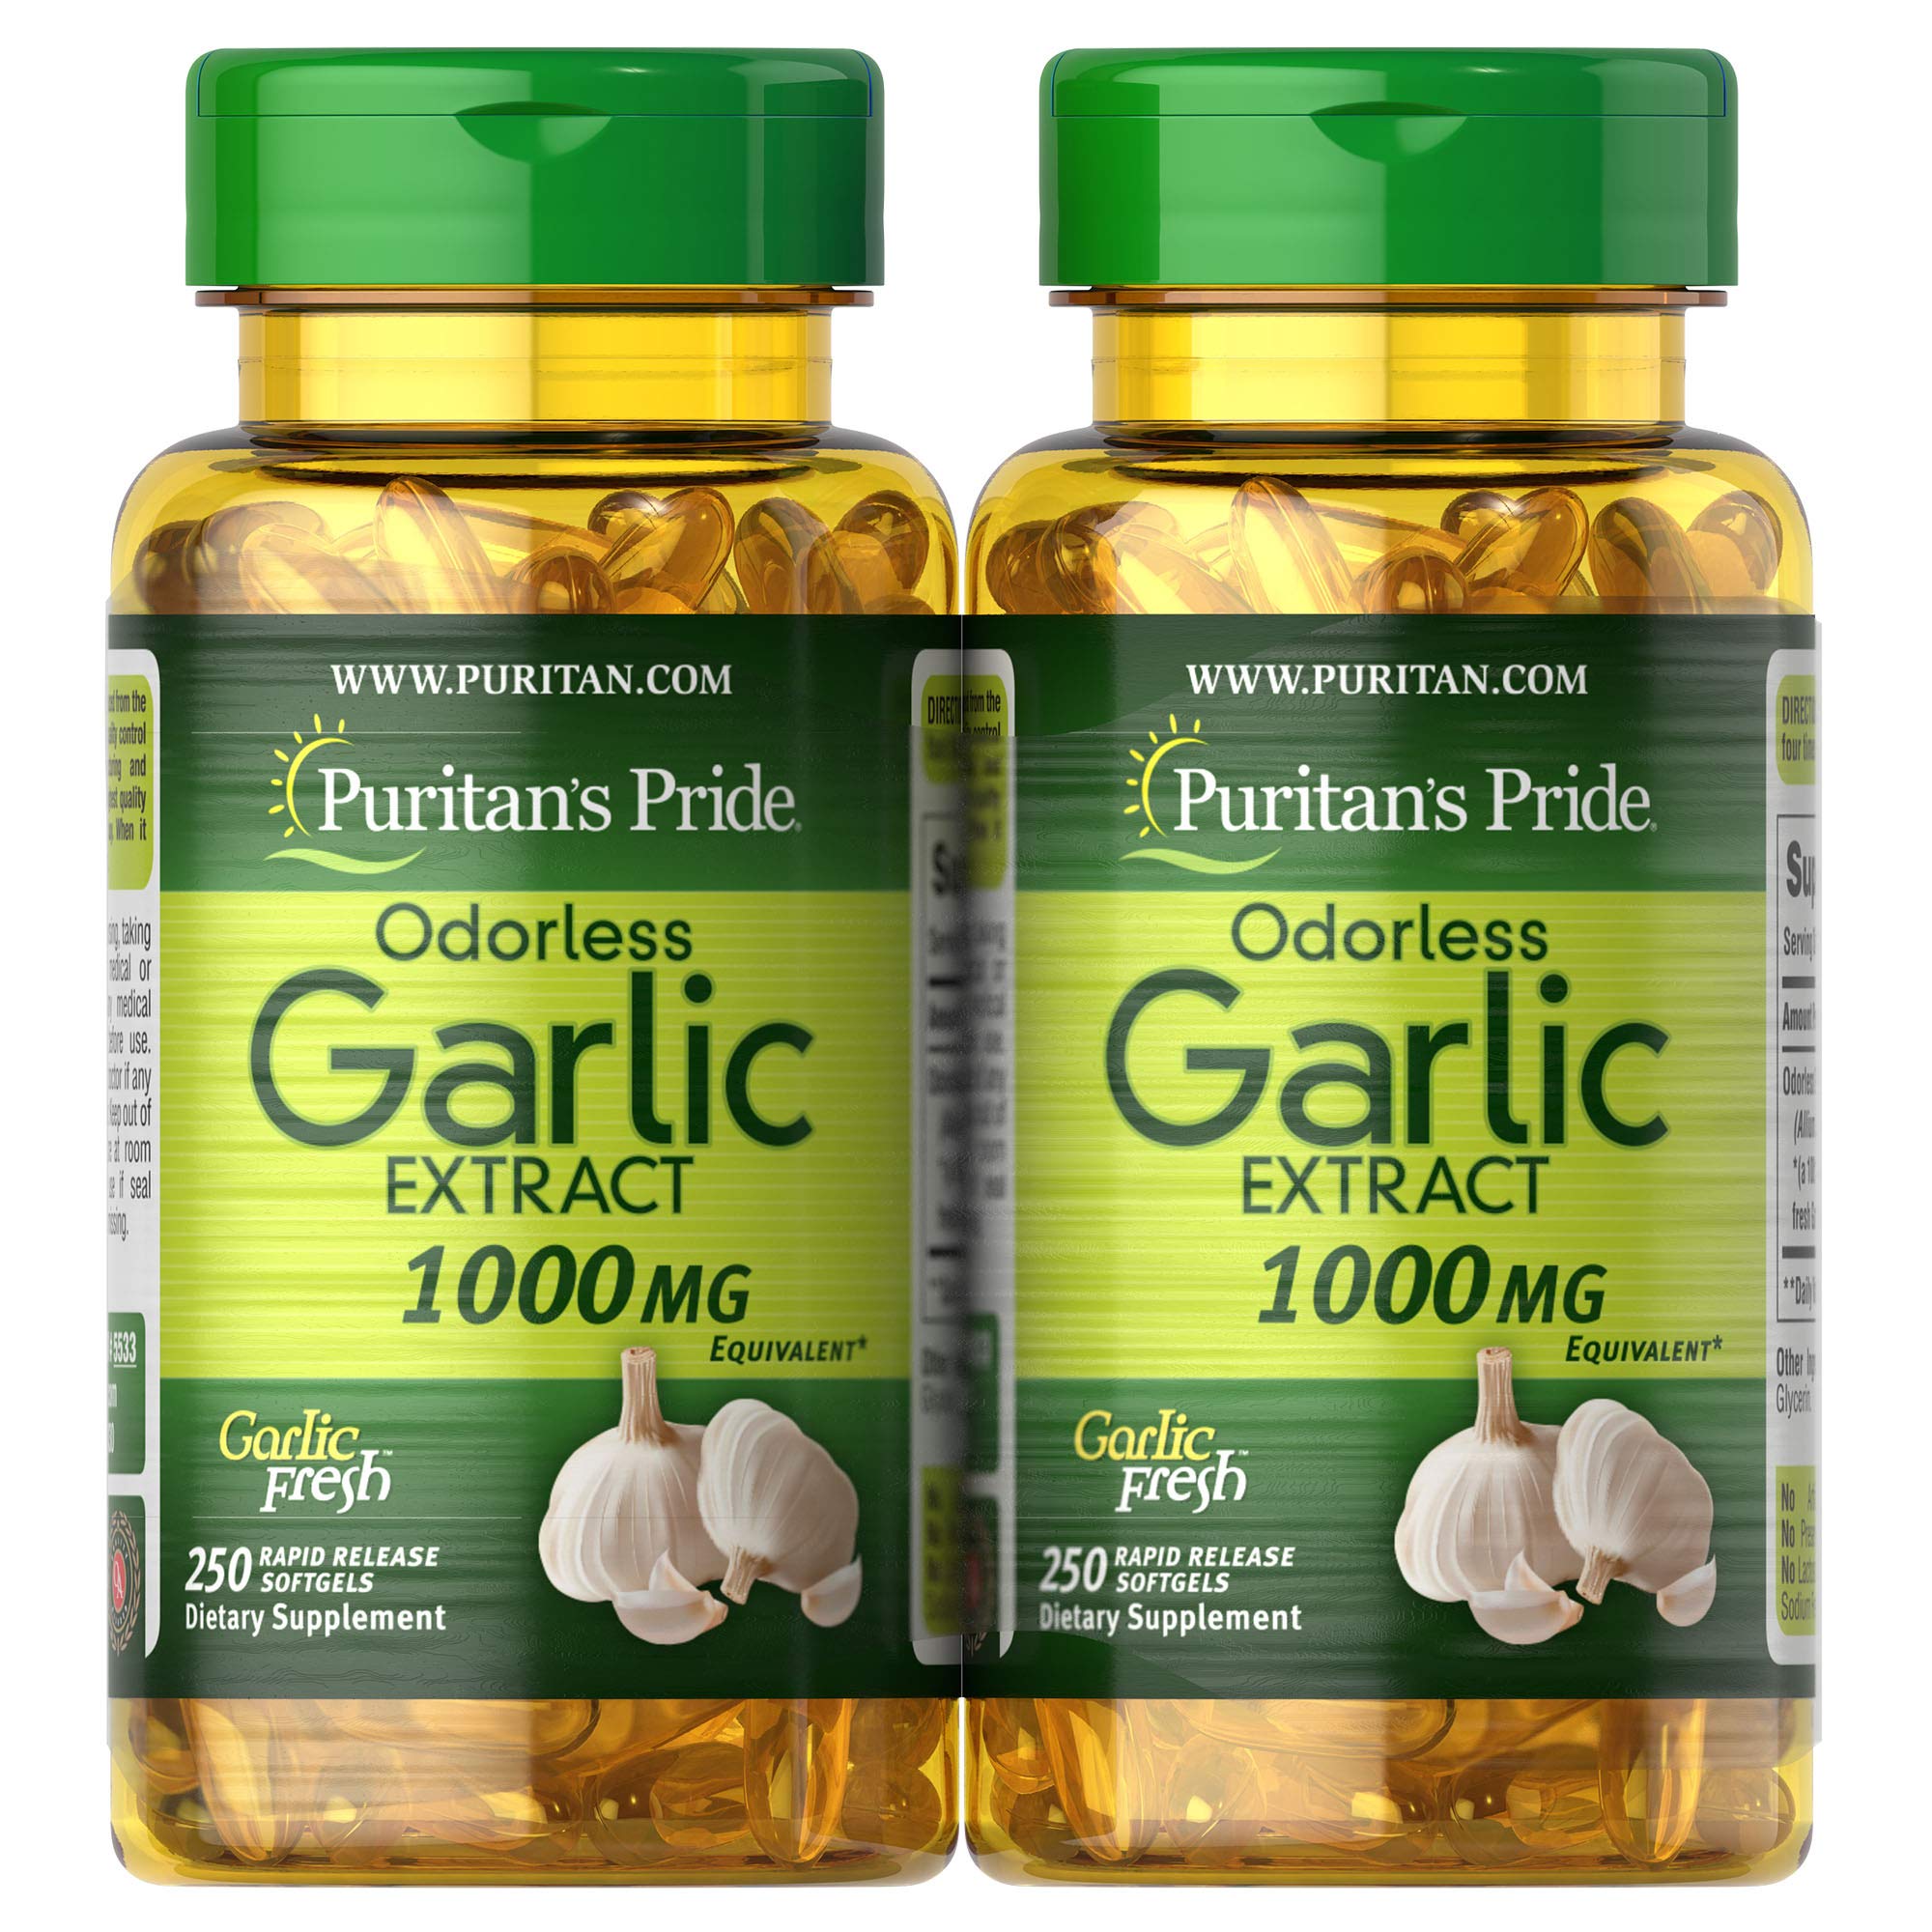 2-Pack 250-Count Puritan's Pride Odorless Garlic 1000 Mg Rapid Release Softgels (500-Ct Total) $9.22 ($4.61 each) w/ S&S + Free Shipping w/ Prime or on $35+